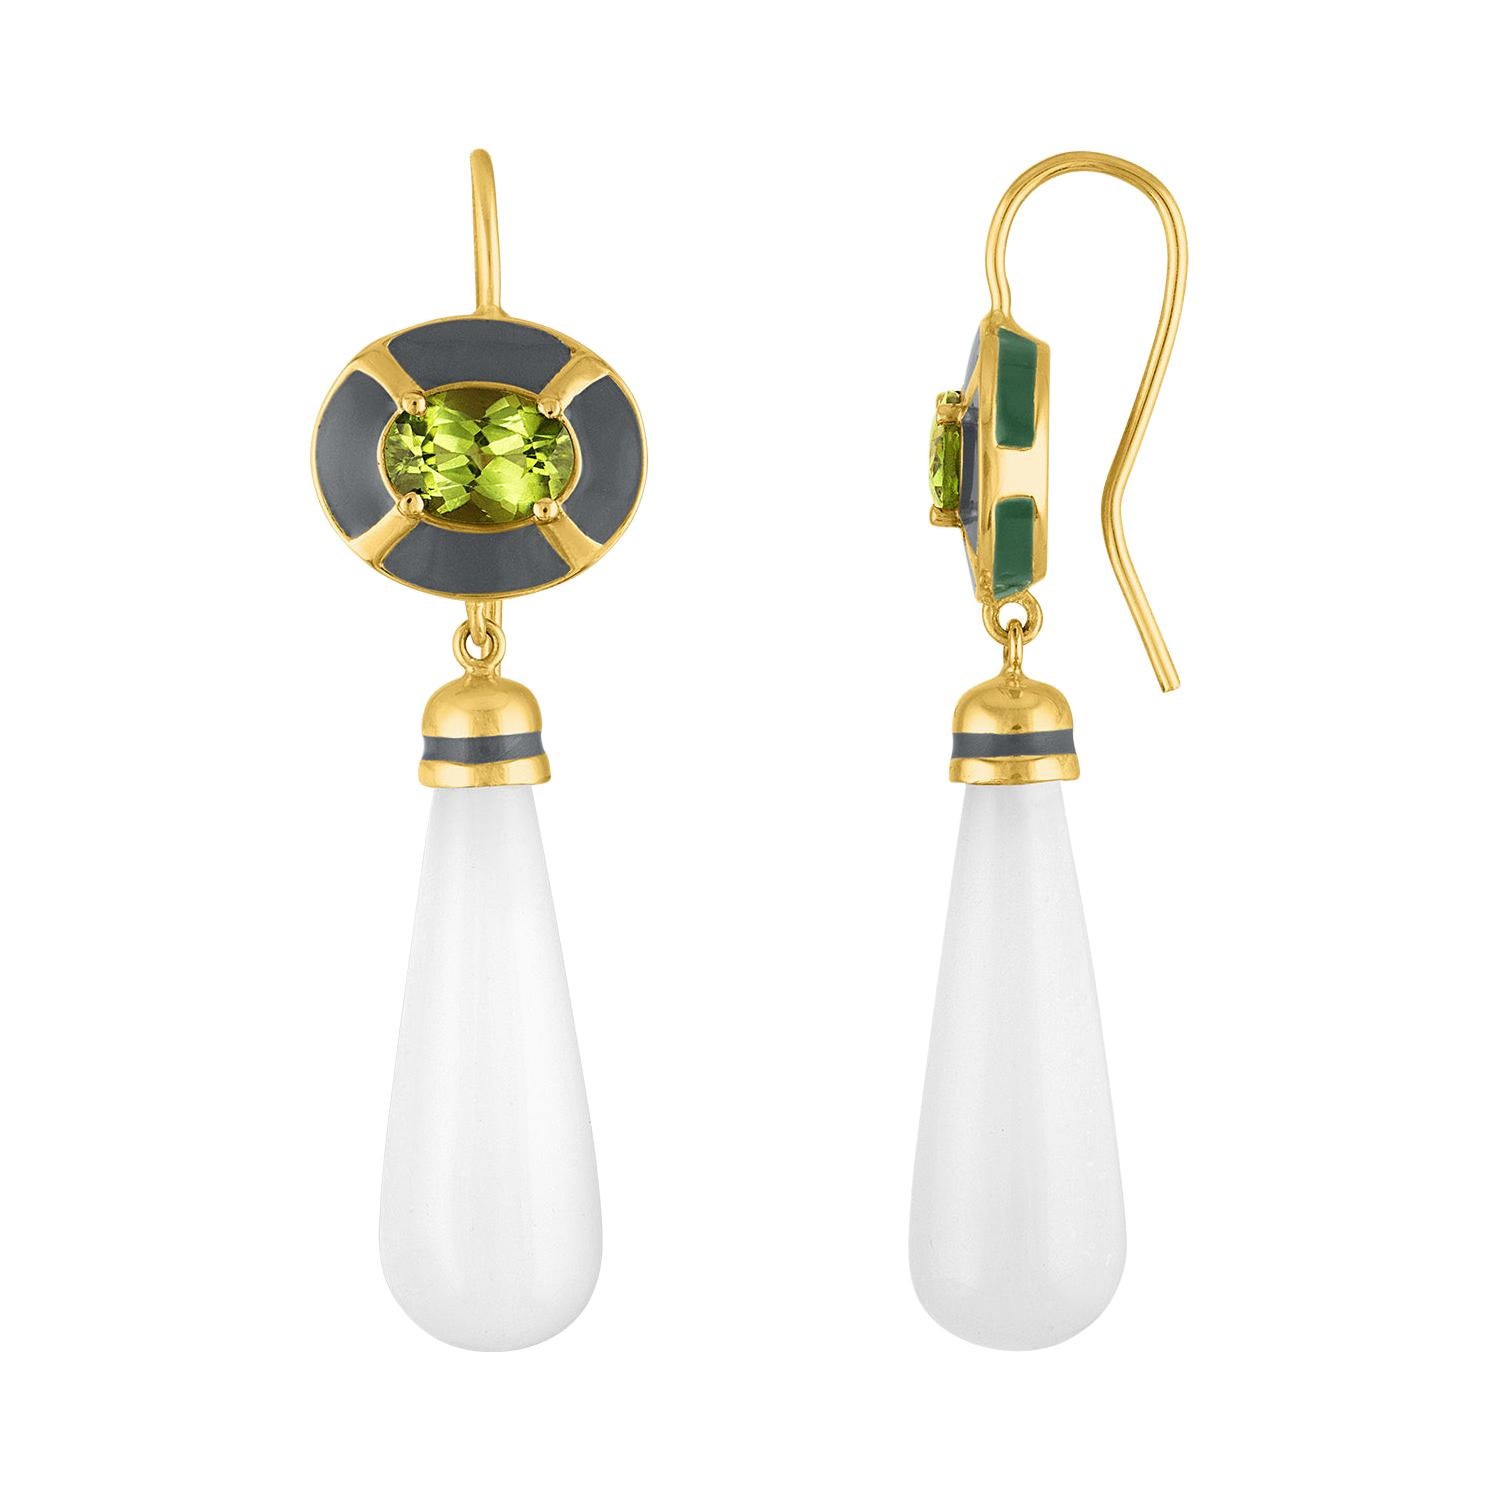 Enamel and 14 Karat Gold Drop Earring with Peridot and Moonstone